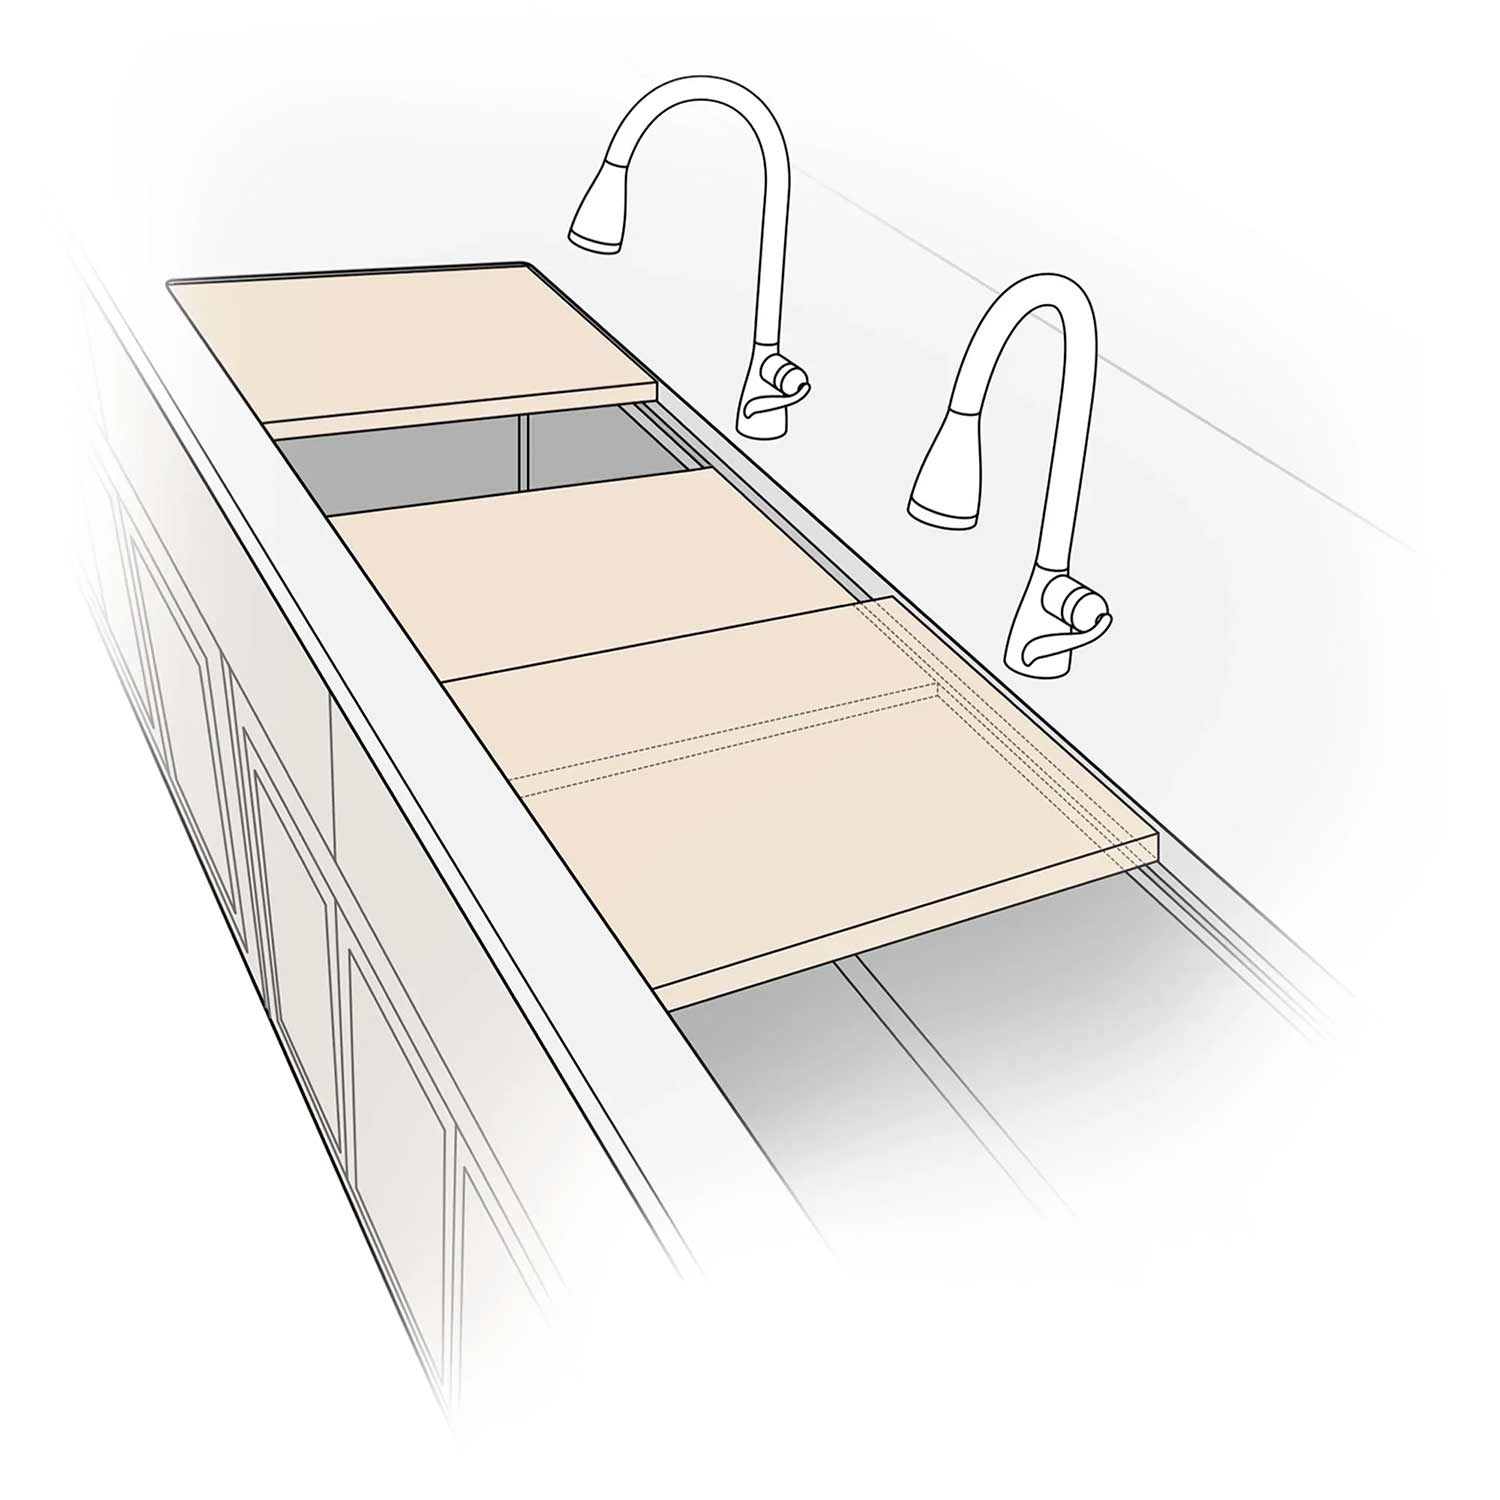 Drawing of 46 inch workstation kitchen sink with two ledges. The second tier is accomplished by cutting a positive reveal in the counter top.